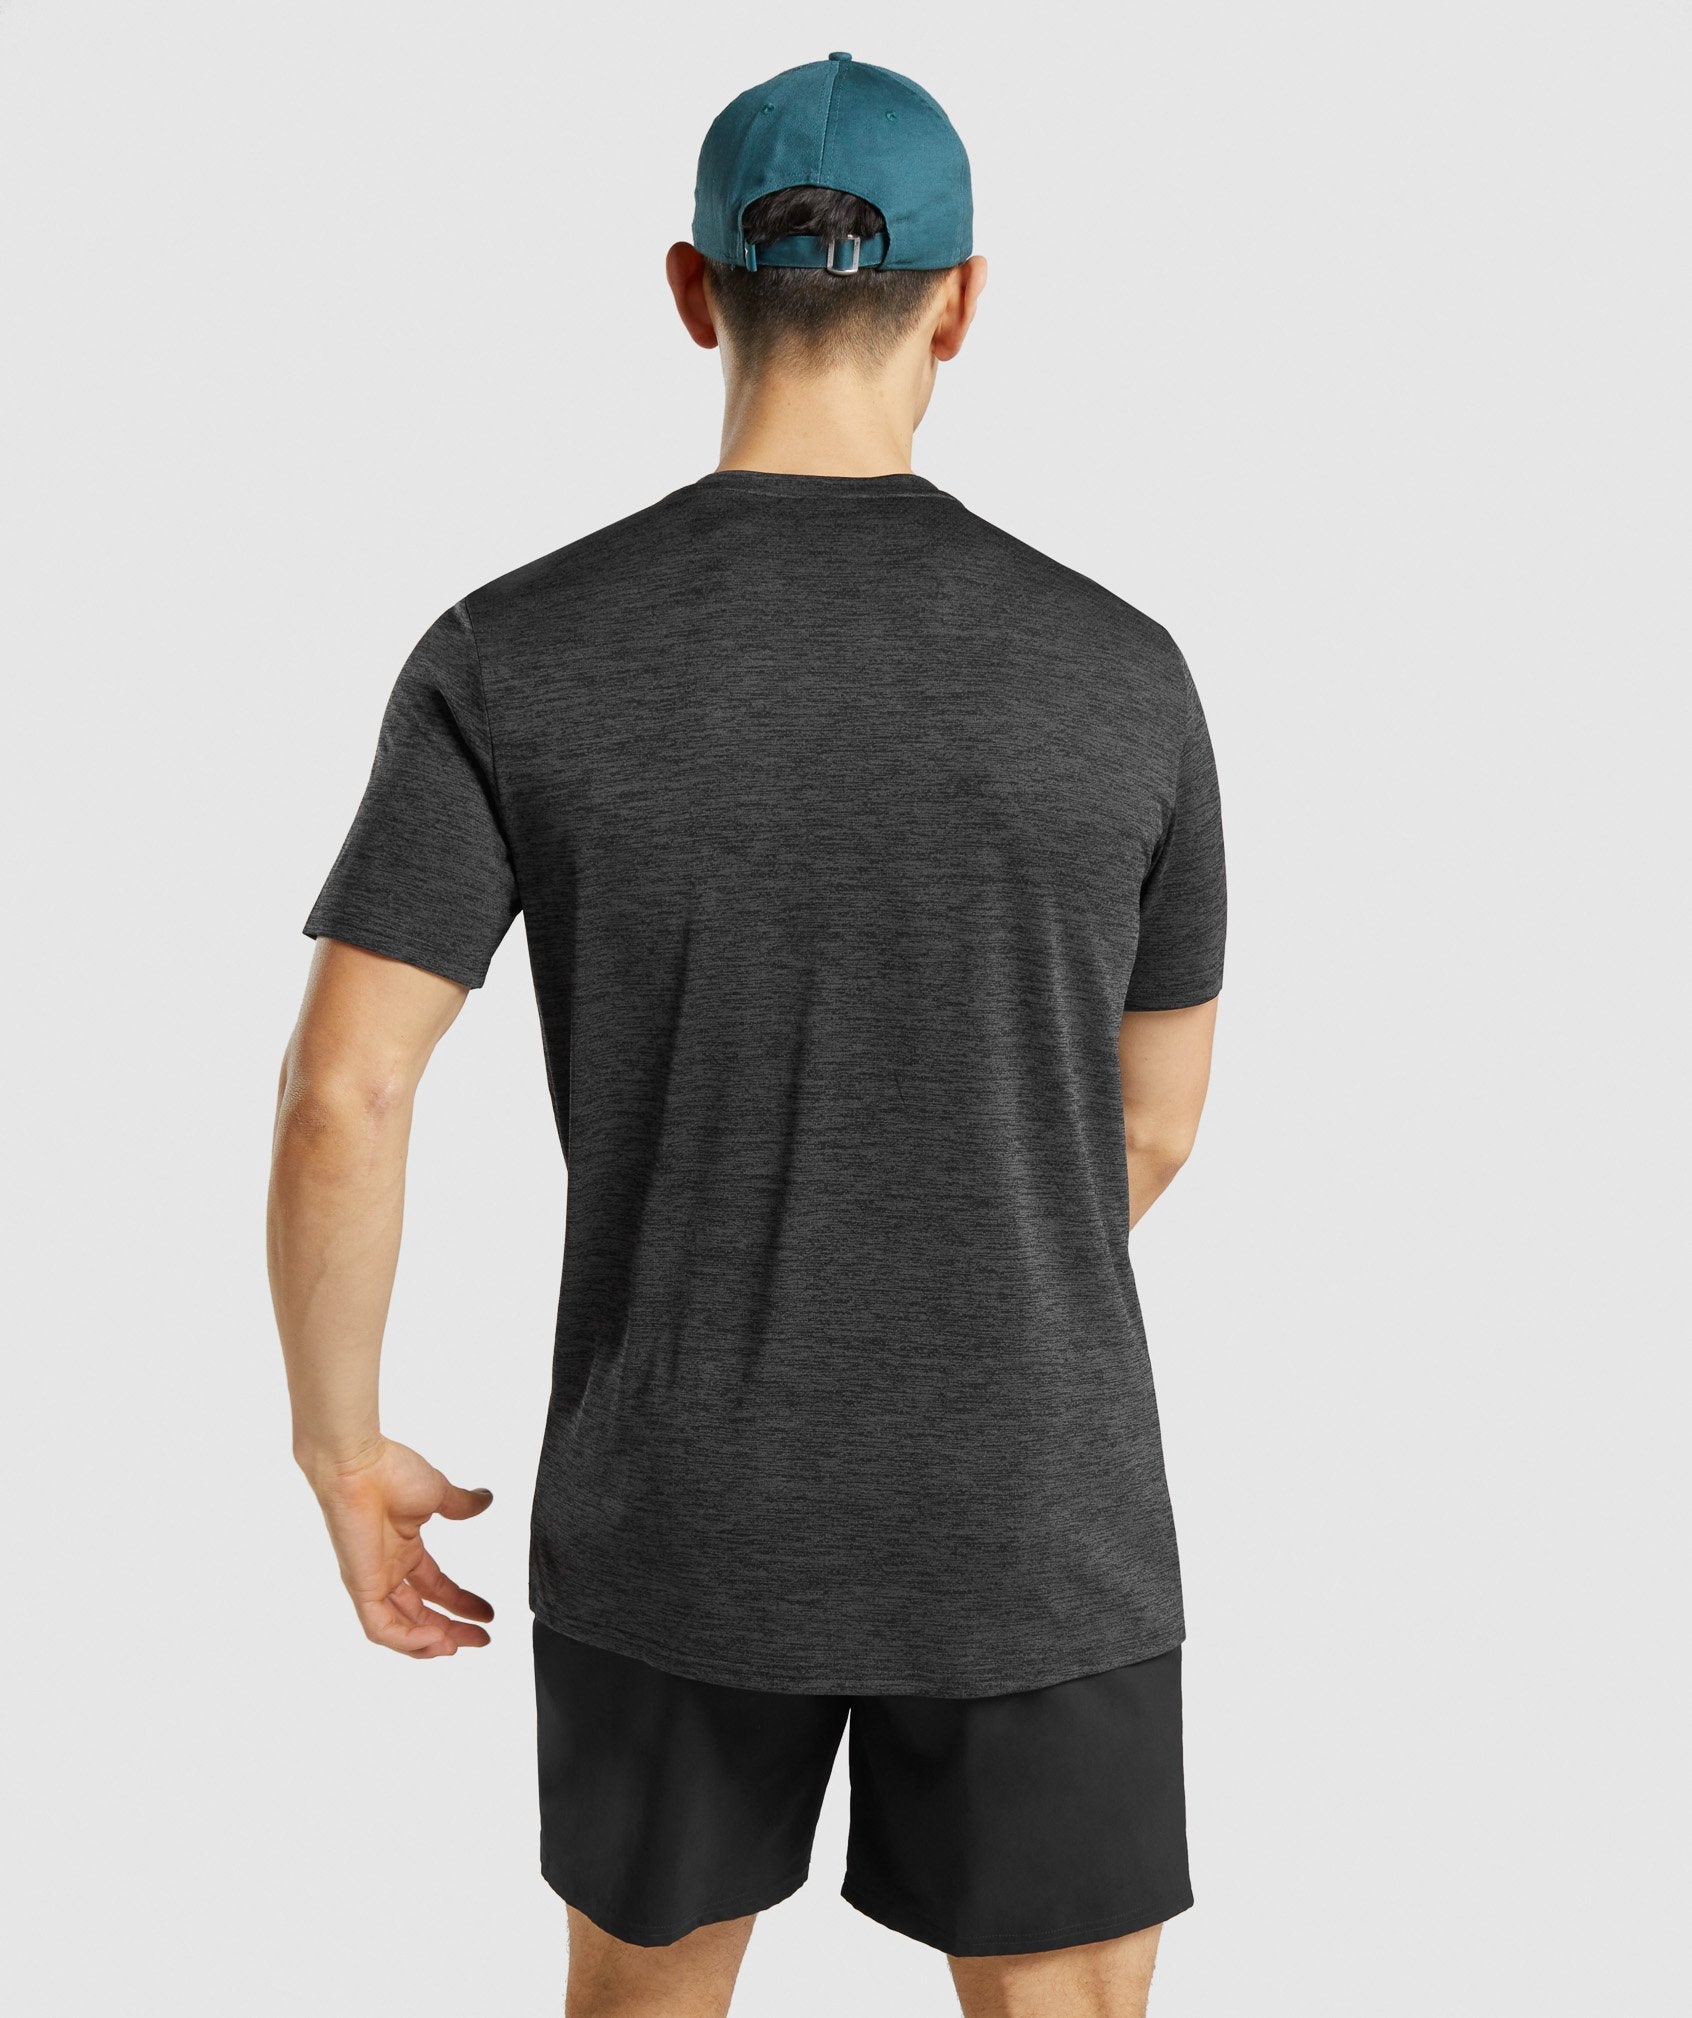 Arrival Marl T-Shirt in Black - view 3